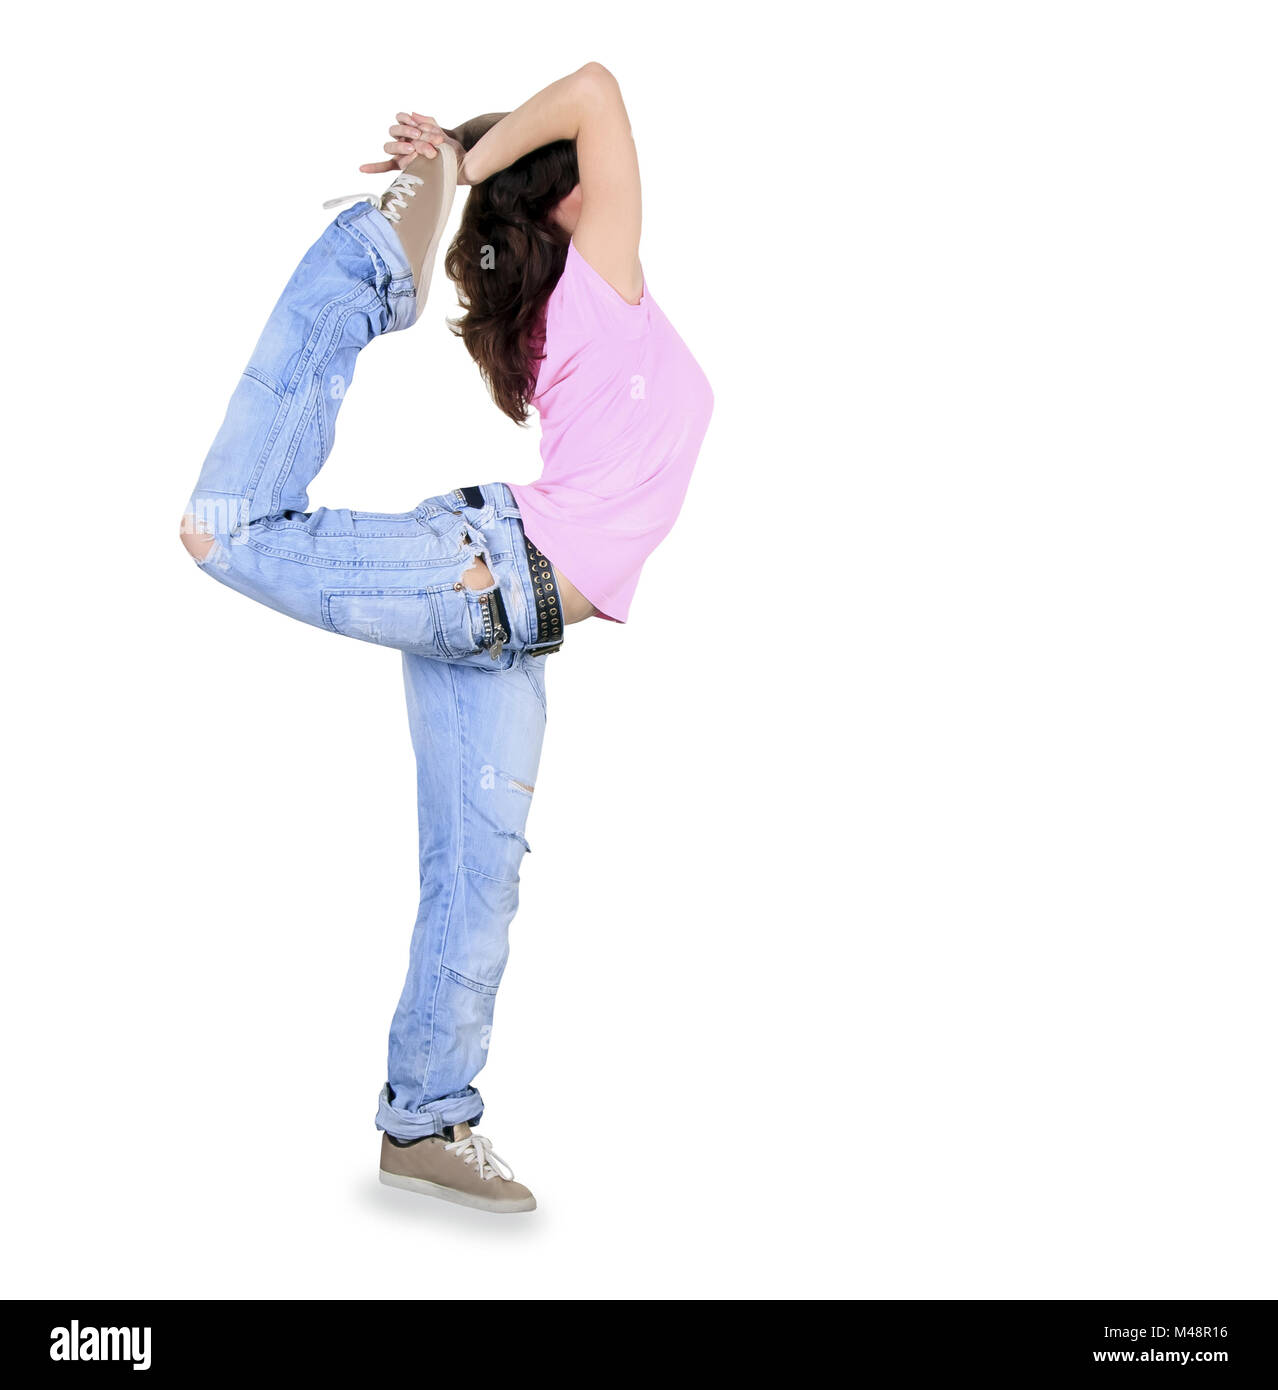 Teenager dance breakdance in action over white Stock Photo